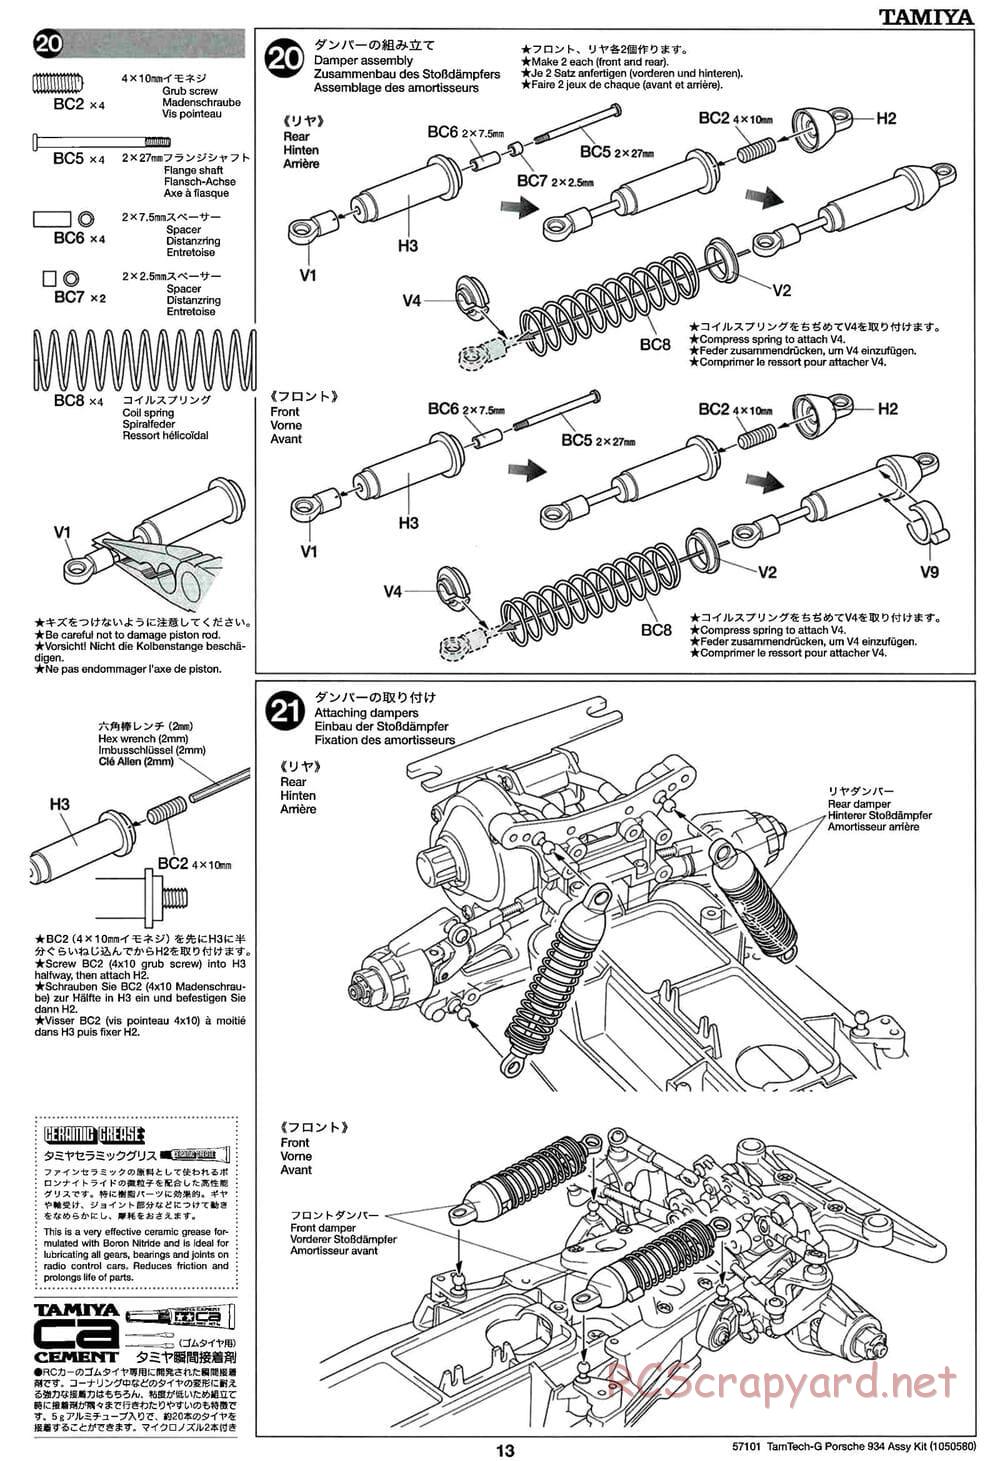 Tamiya - Porsche Turbo RSR - GT-01 Chassis - Manual - Page 13